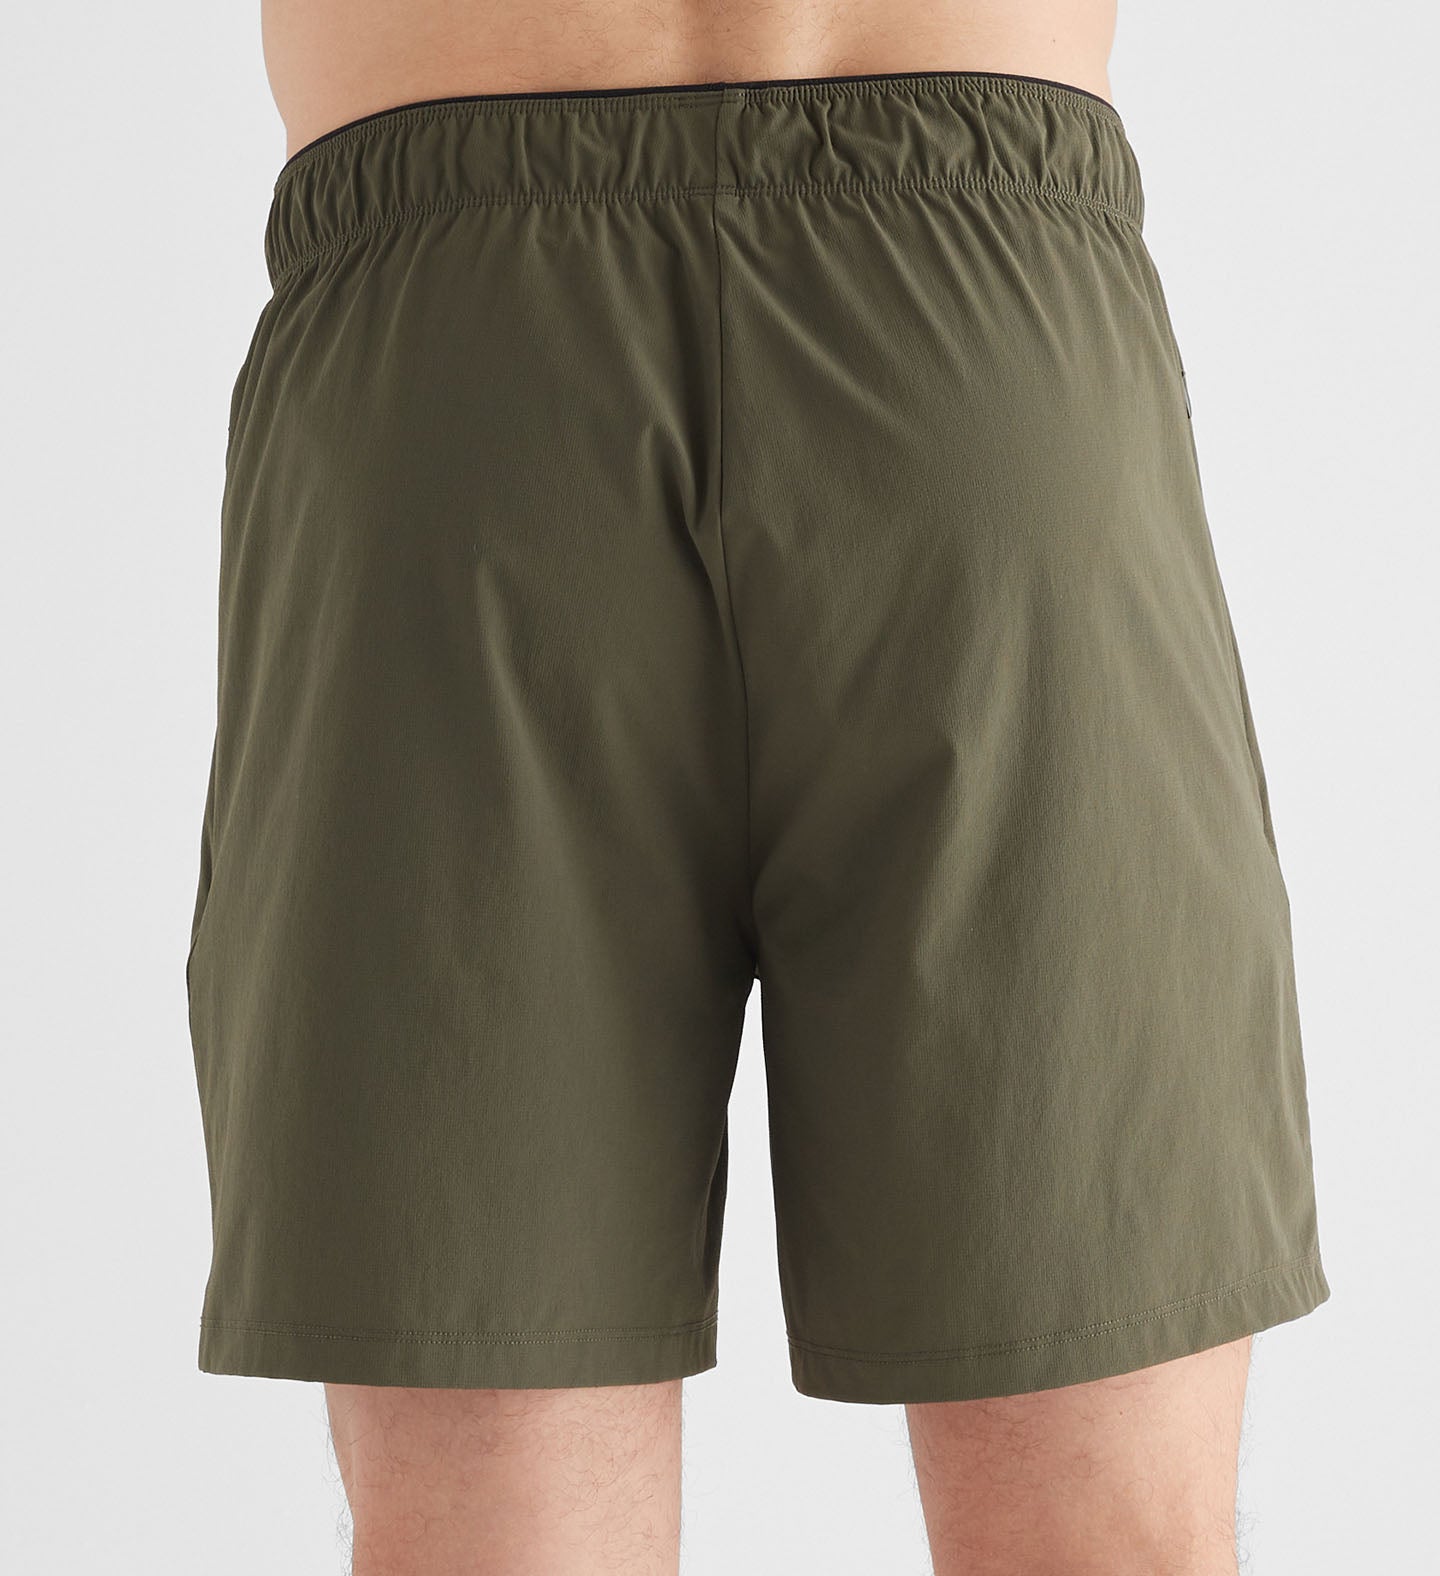 LULULEMON SURGE SHORT 6 REVIEW!!! (ARE THEY GOOD???) 